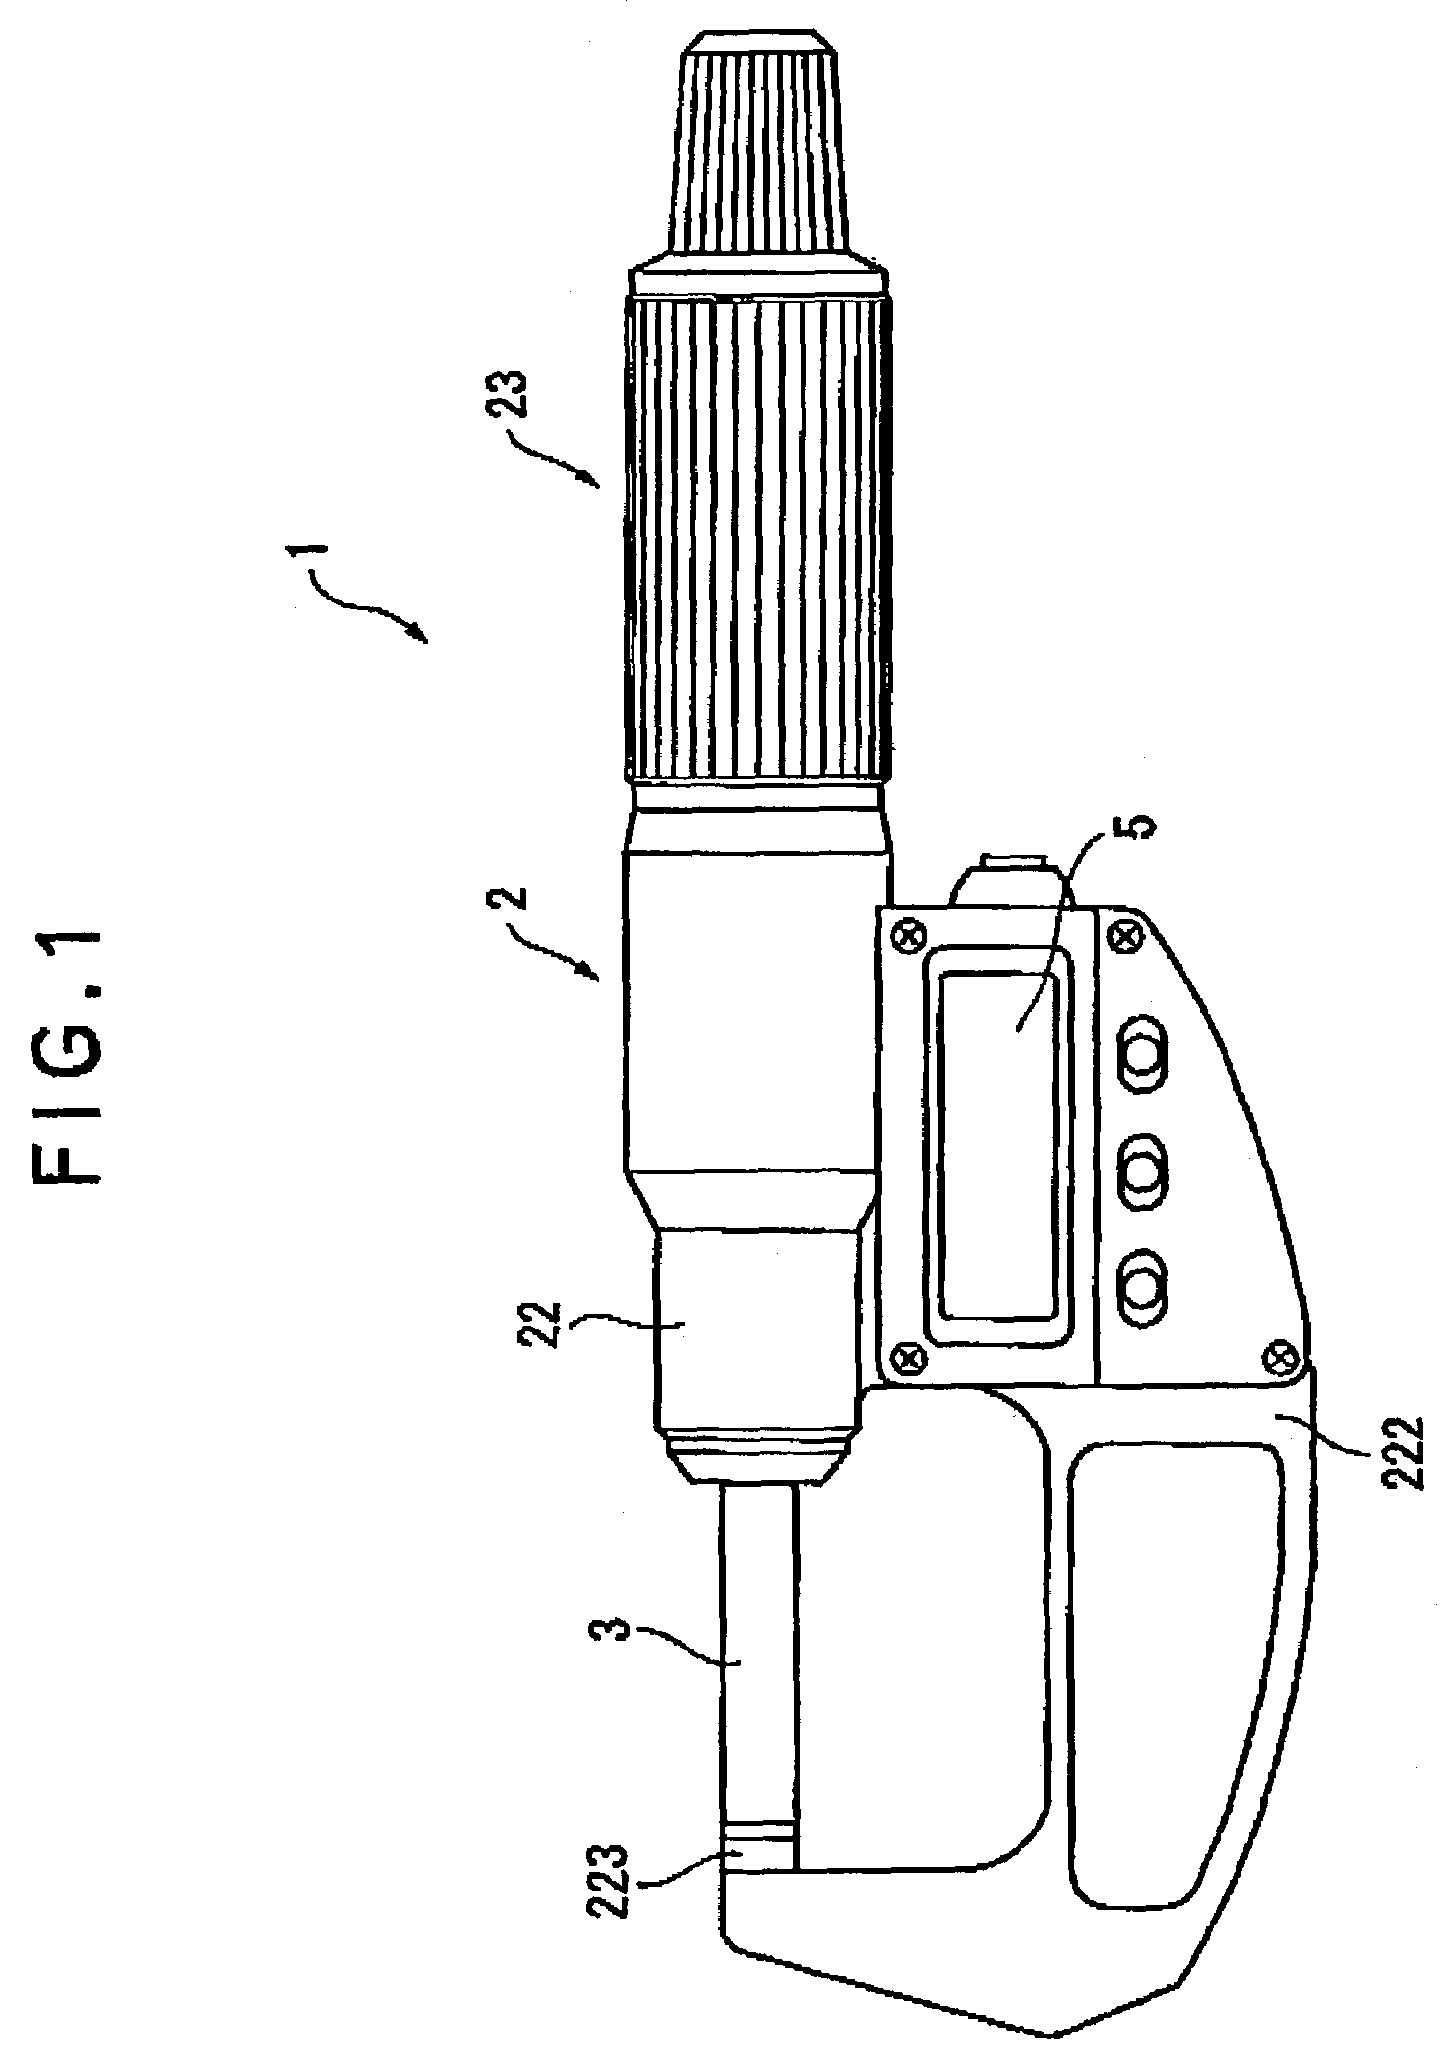 Measuring device using multi-start threaded spindle